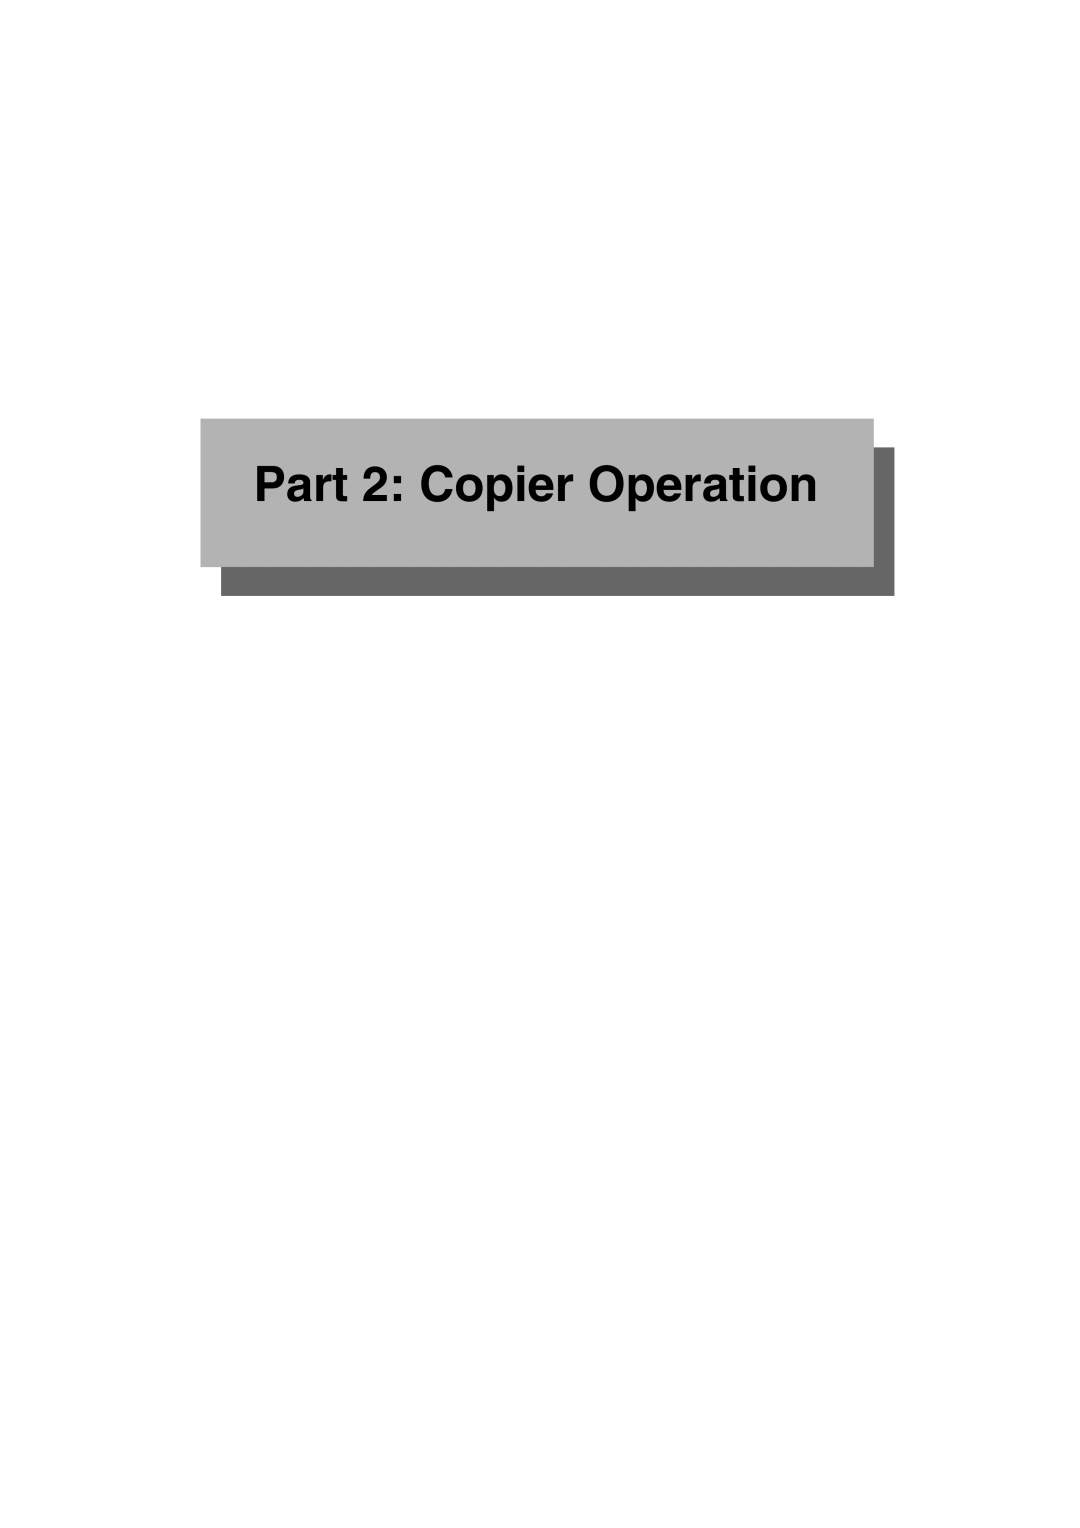 Sharp AR-M451N specifications Part 2 Copier Operation 